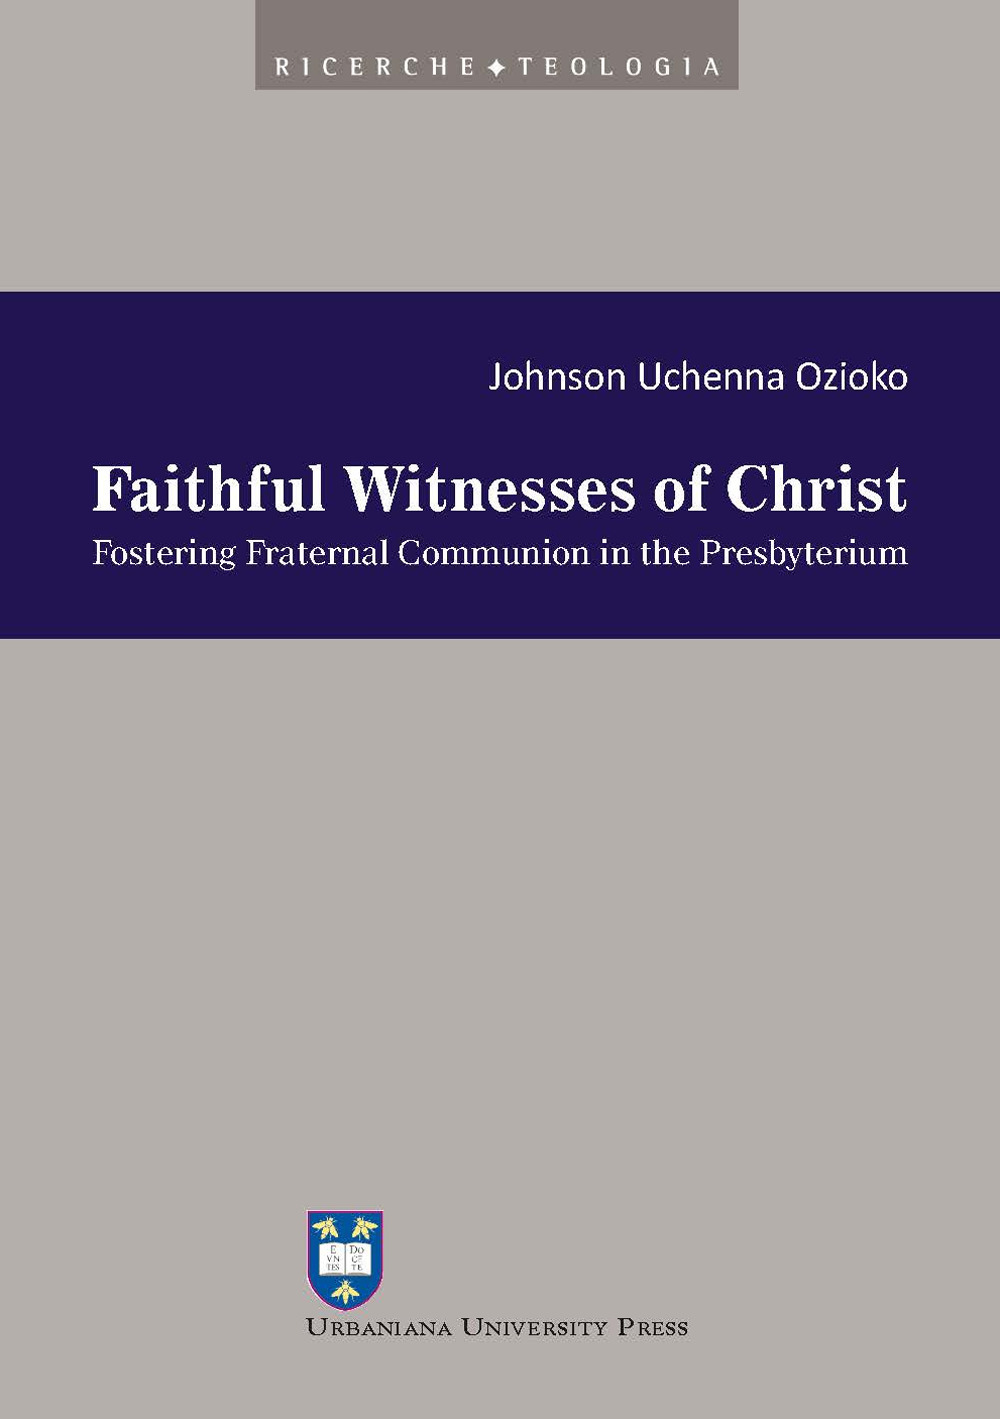 Faithful witnesses of Christ. Fostering fraternal communion in the presbyterium